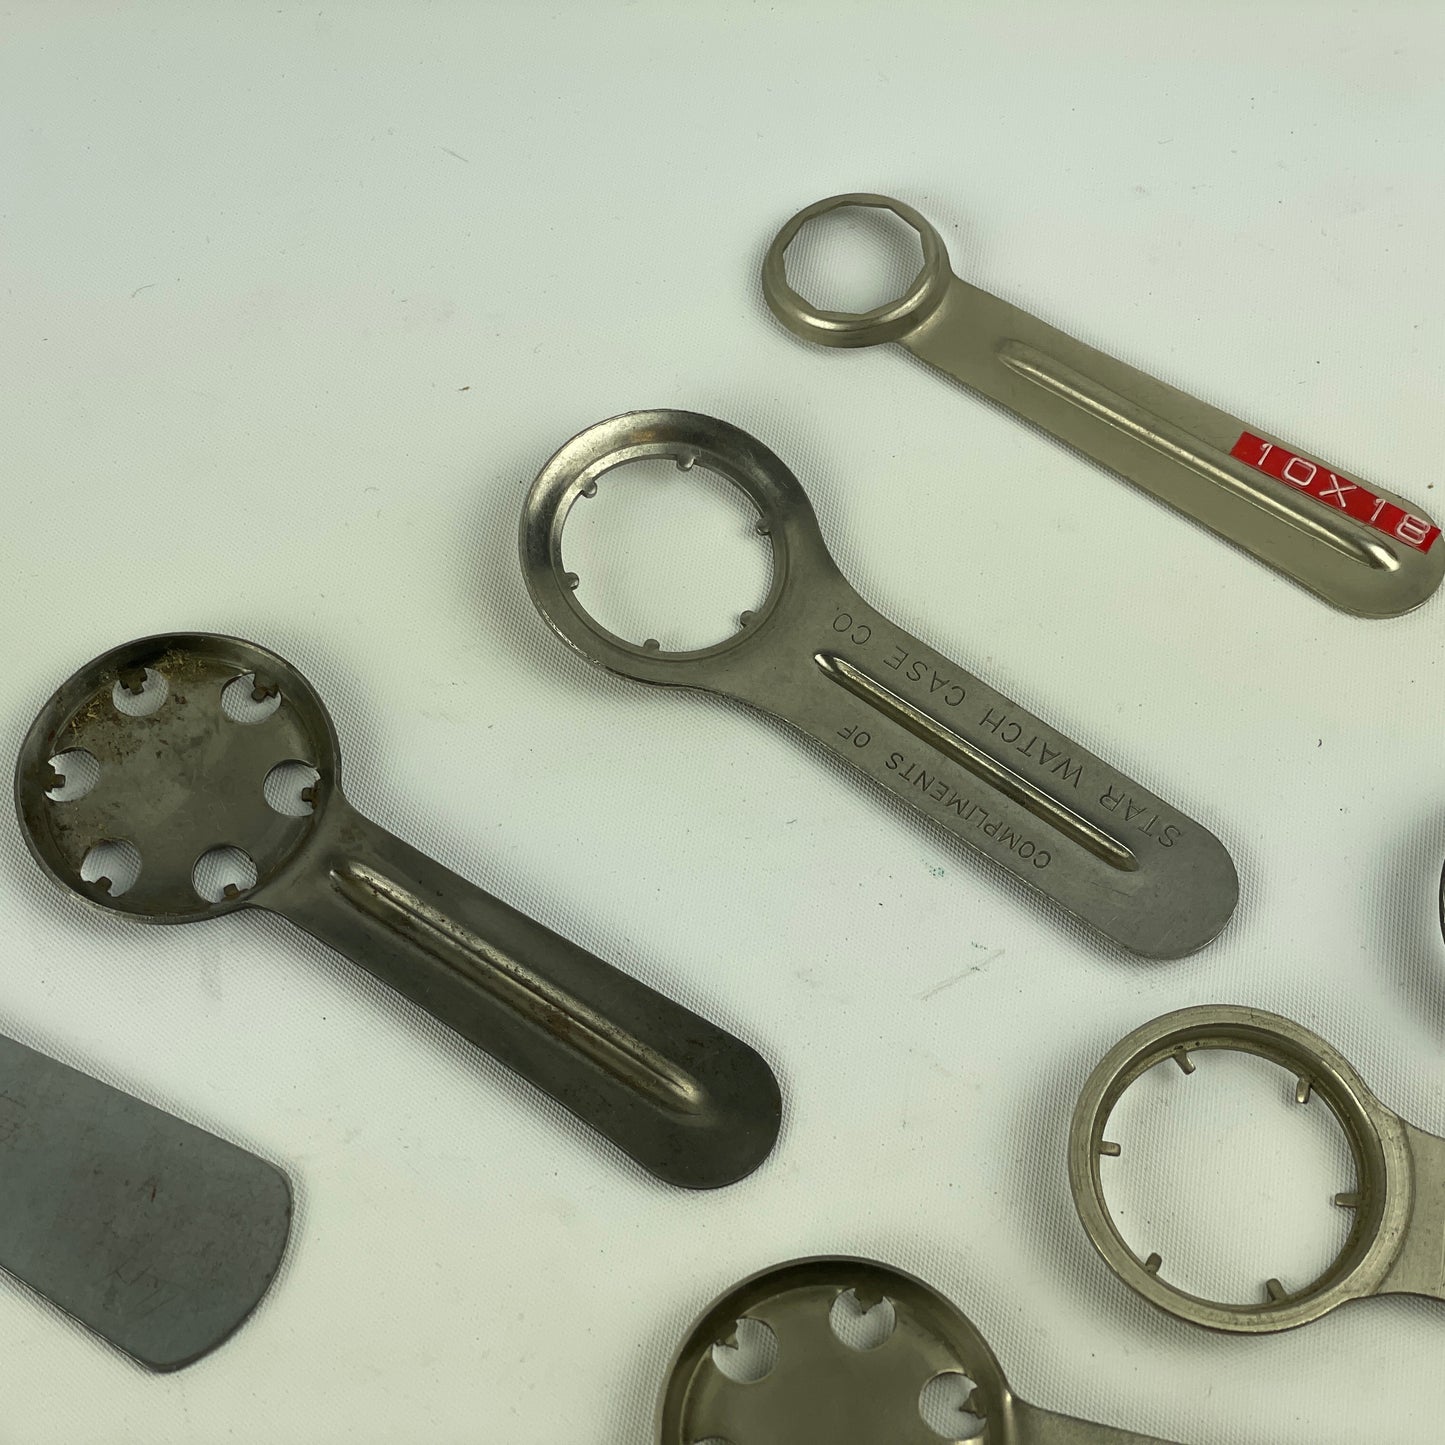 Feb Lot 55- Watchmaker’s Selection of Waterproof Round Wristwatch Case Wrenches